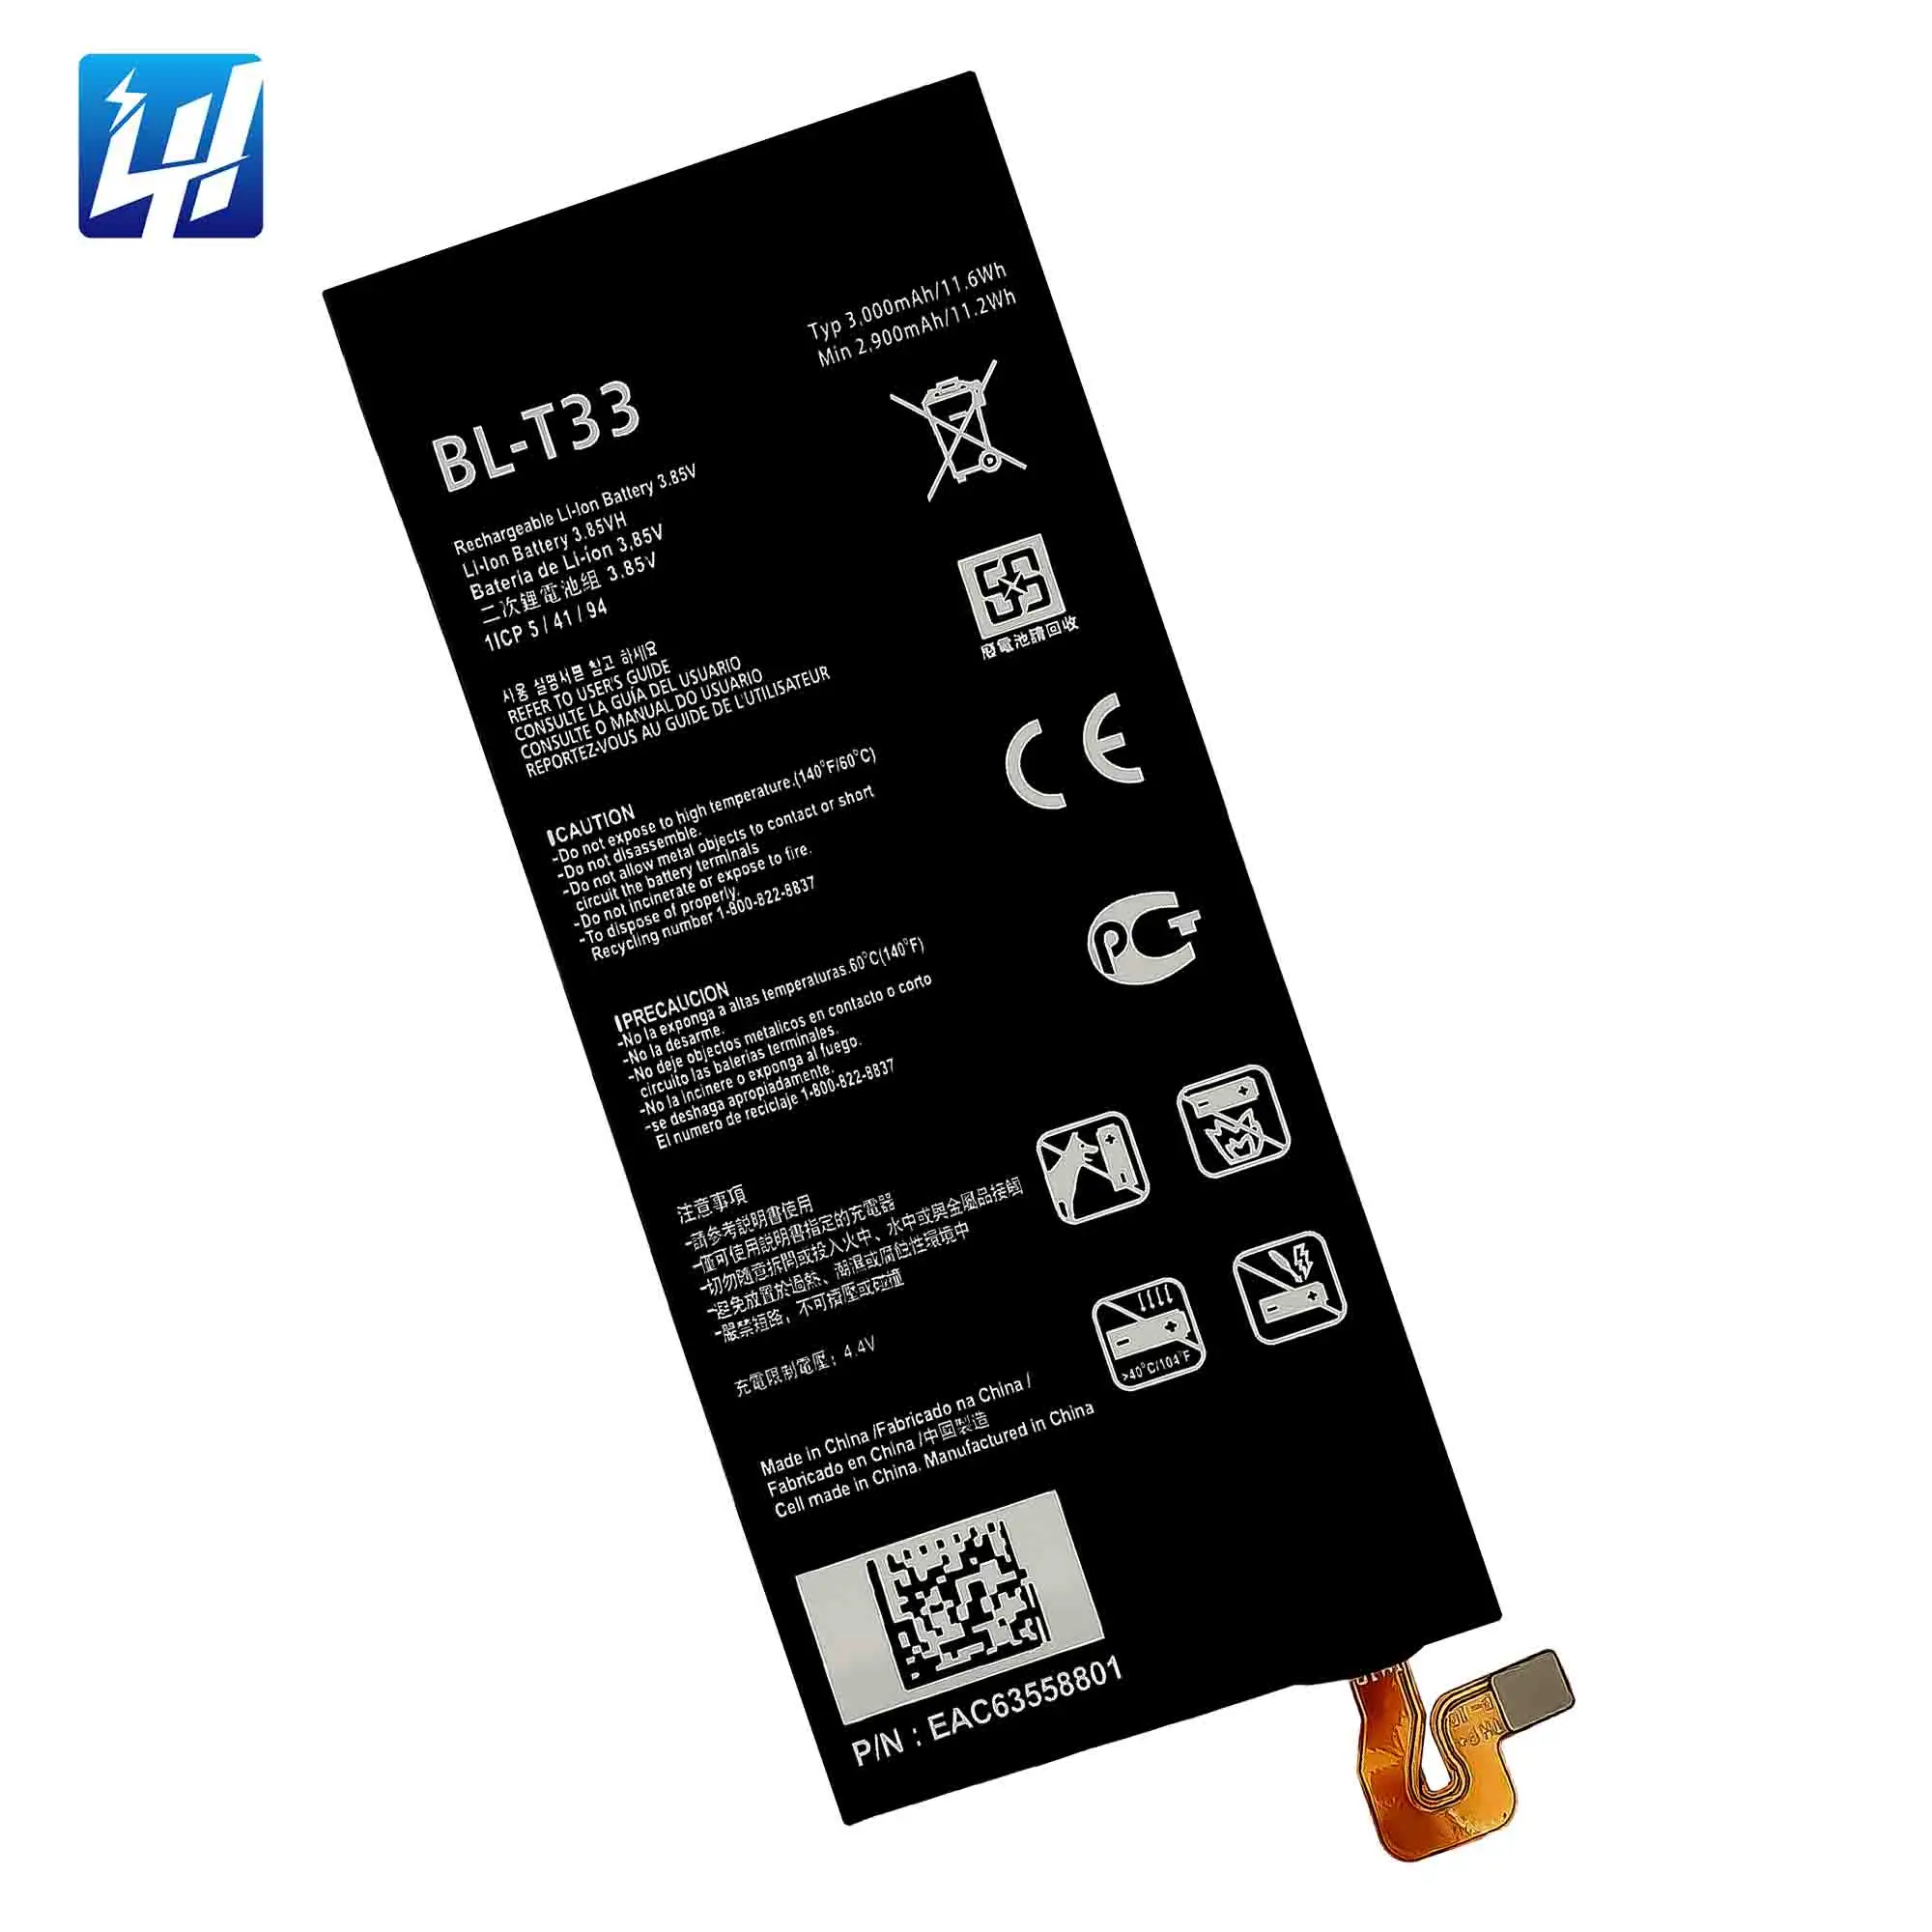 

T33 M700A M700DSK M700AN Q6+ G6mini 2021 Brand New O Cycle Replacement cell Phones Battery for LG Q6